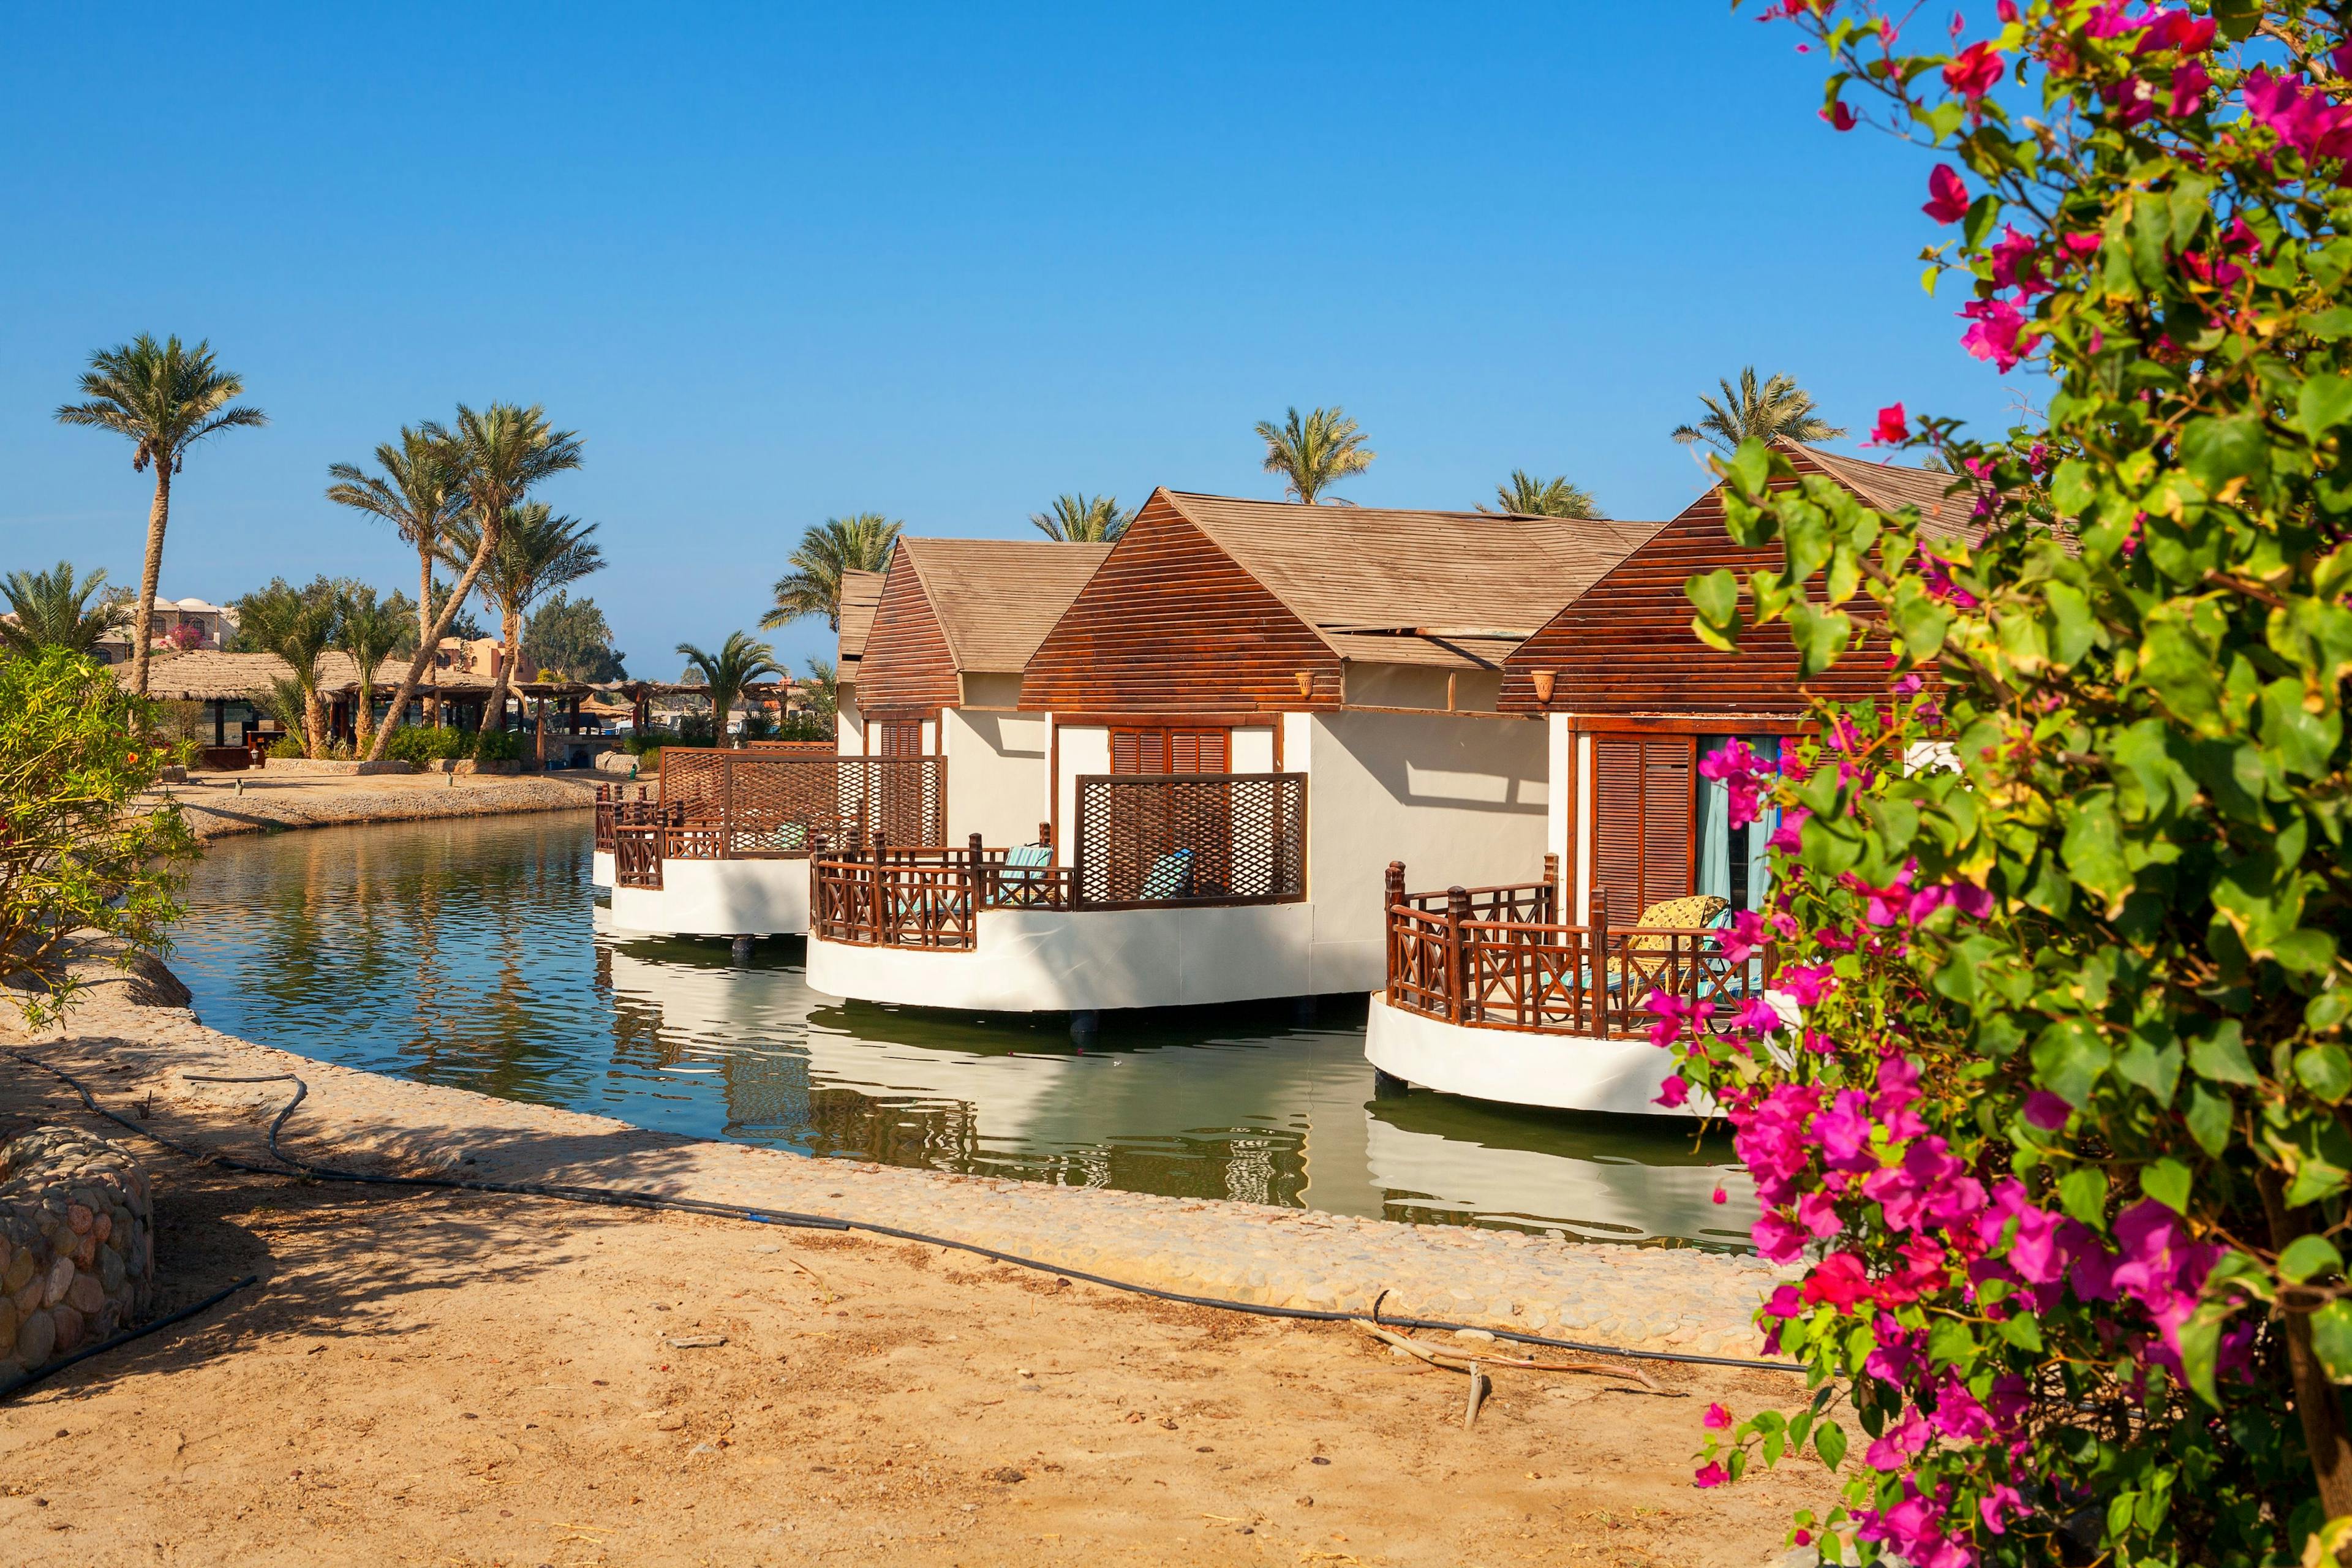 Bungalow on a canal. El Gouna, Egypt, Red Sea